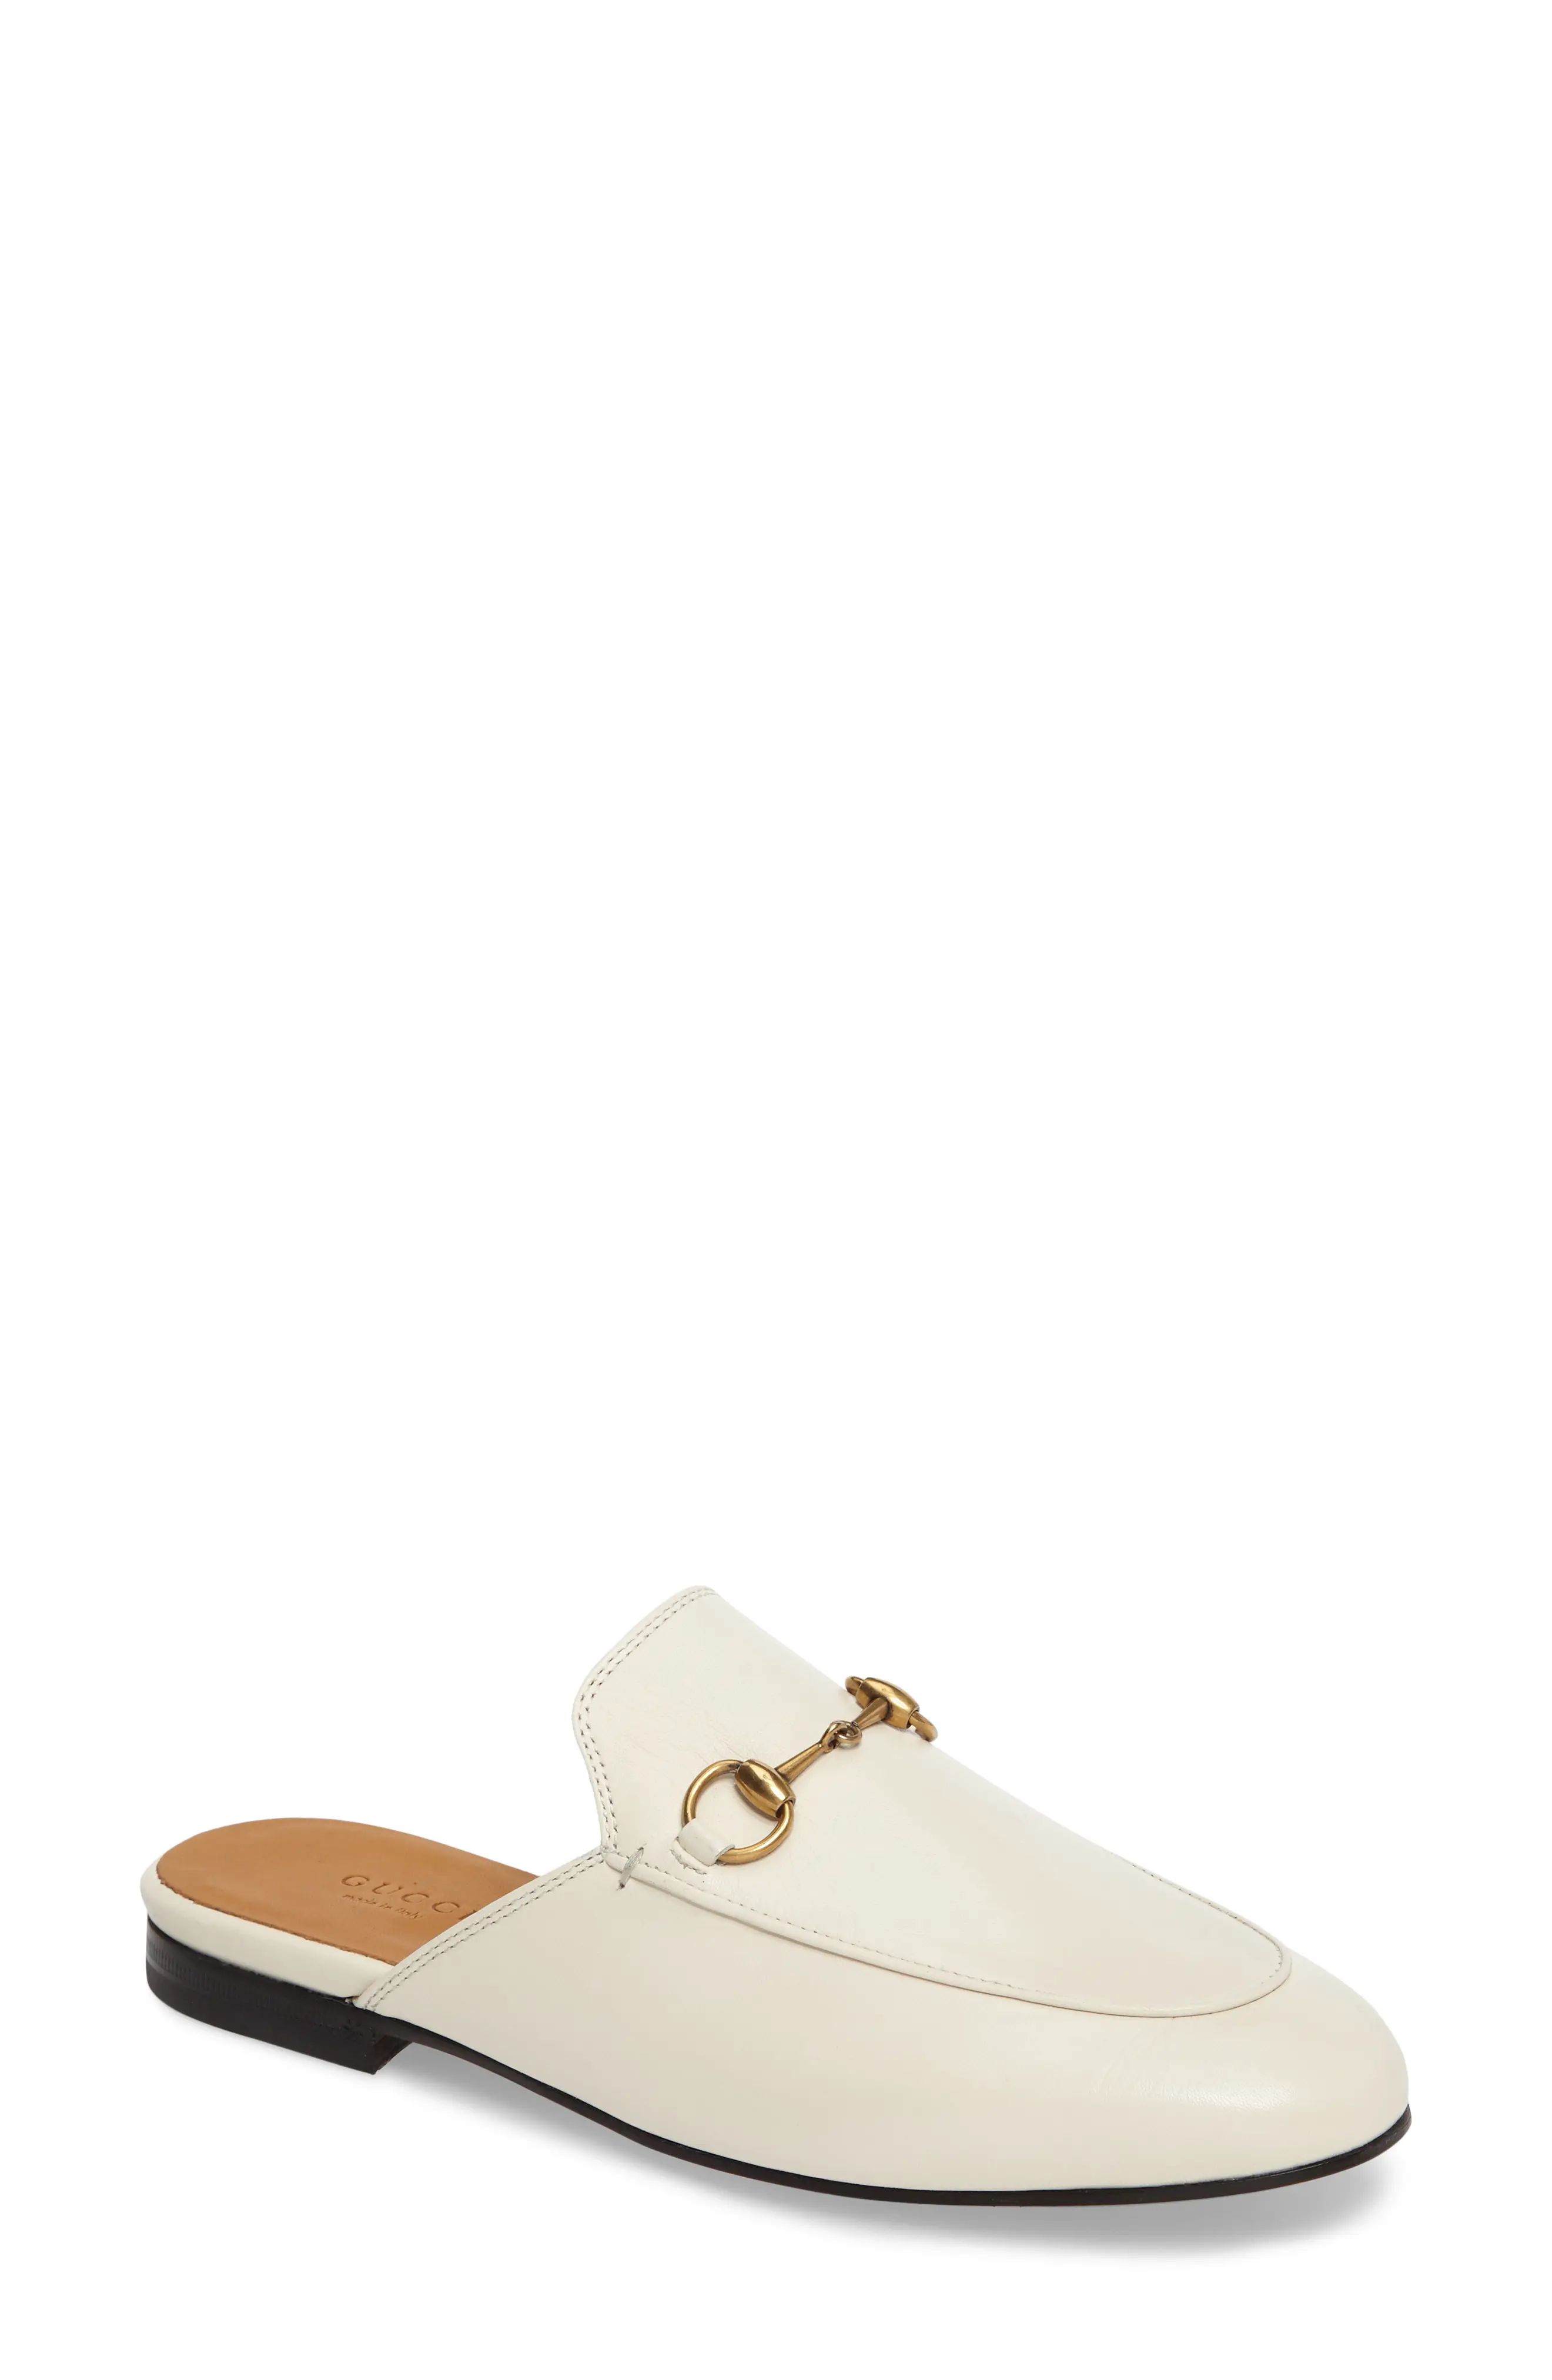 Gucci Princetown Loafer Mule in White Leather at Nordstrom, Size 5Us | Nordstrom